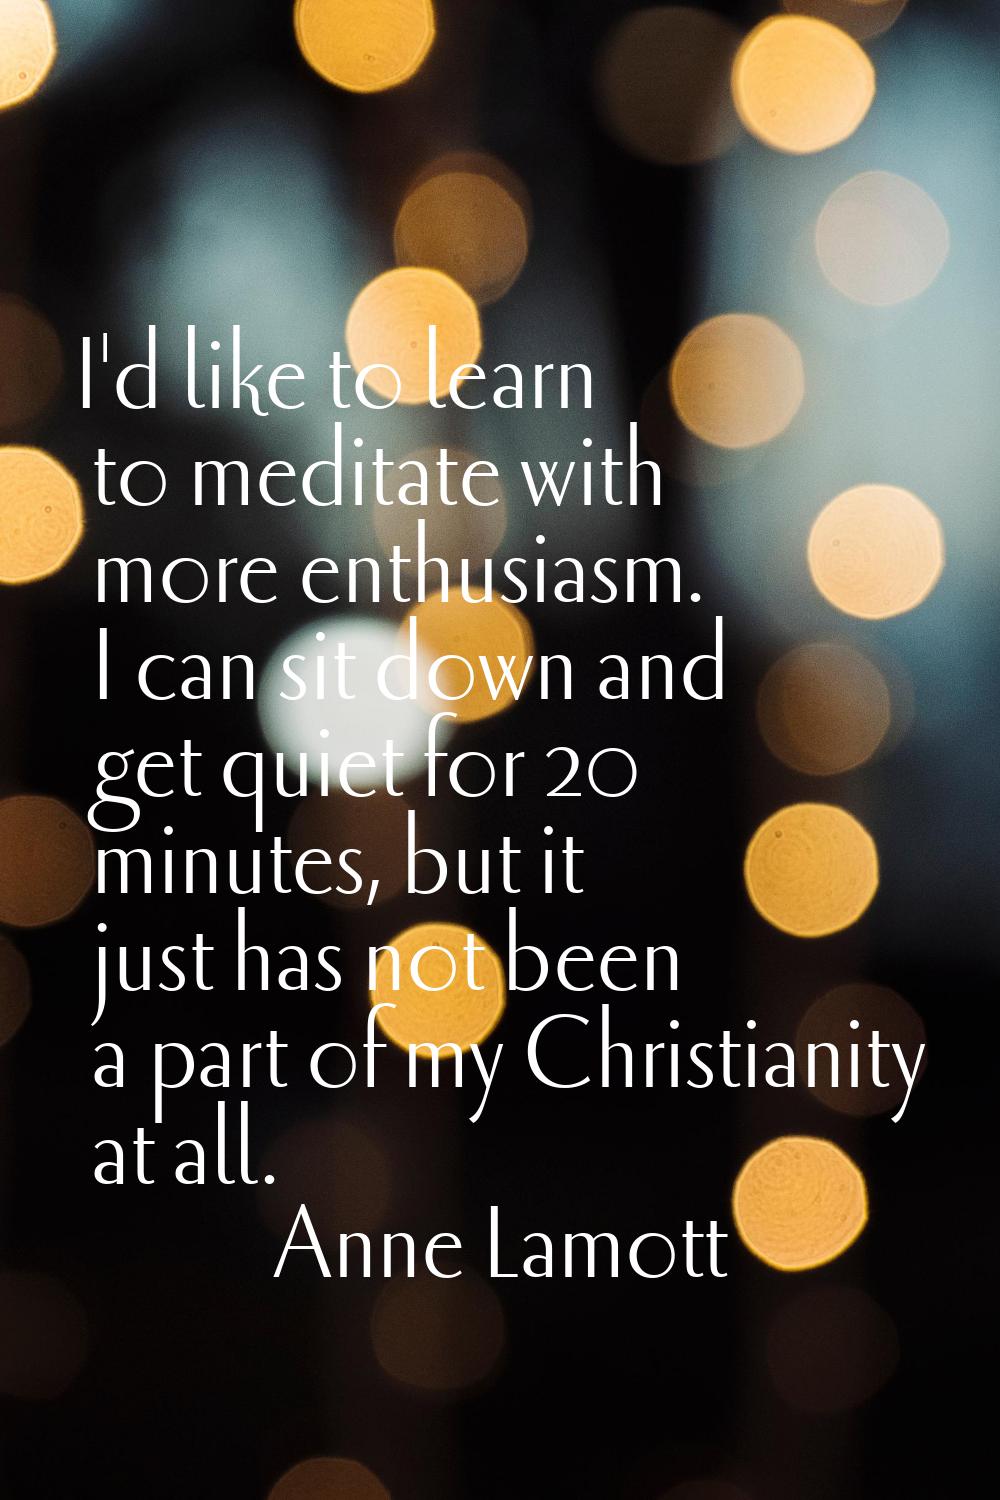 I'd like to learn to meditate with more enthusiasm. I can sit down and get quiet for 20 minutes, bu